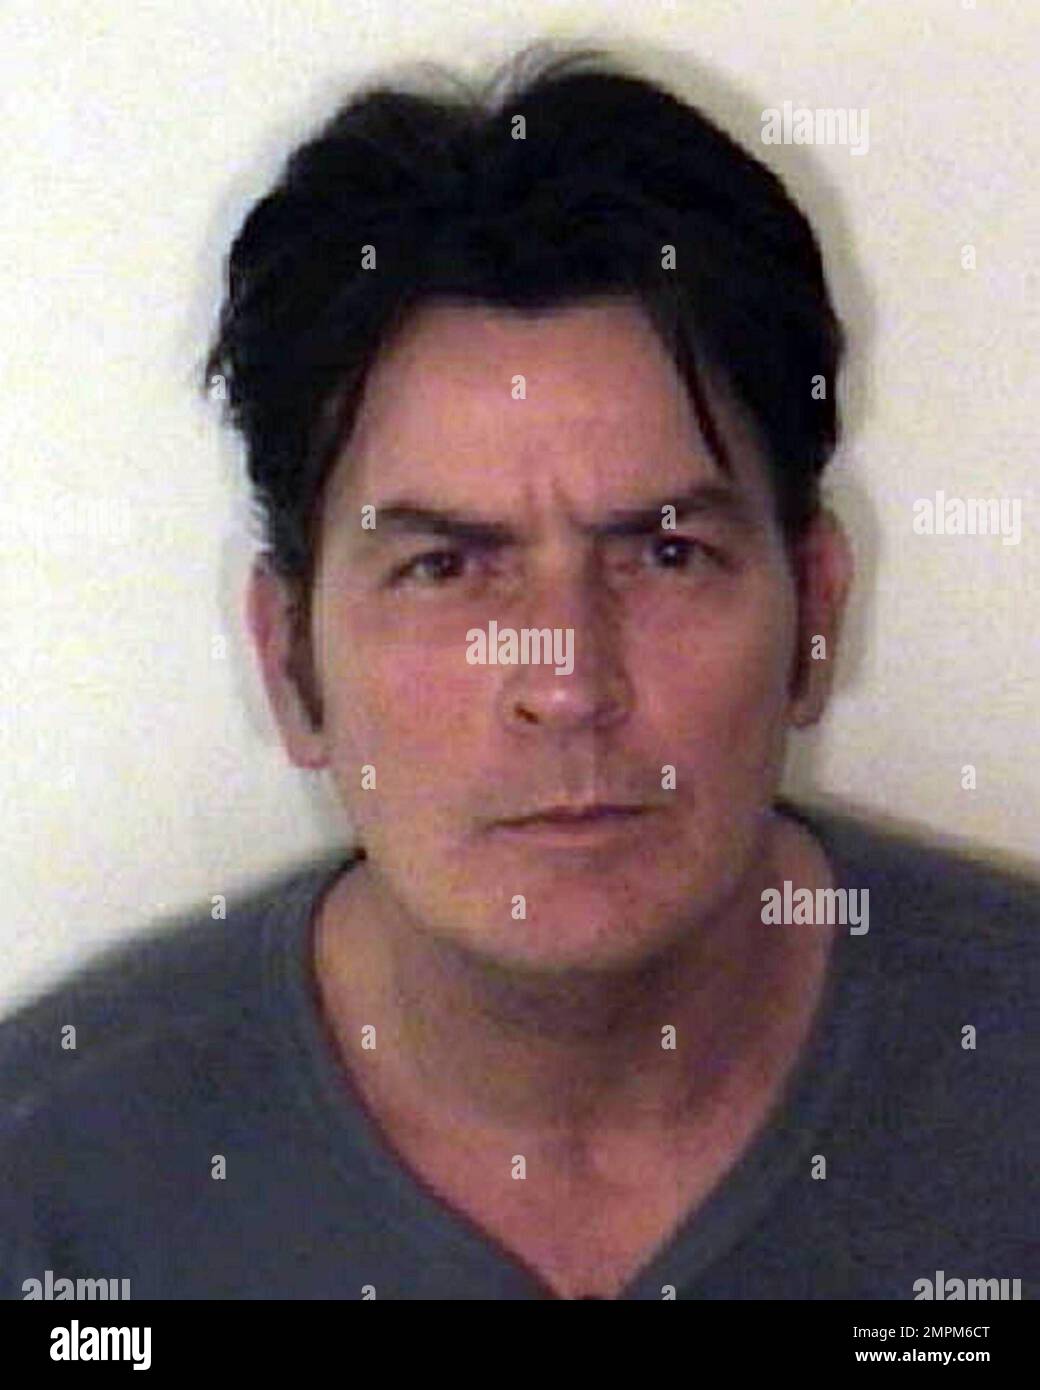 This Is Charlie Sheens Christmas Day Booking Photo Taken Following His Arrest For Domestic 